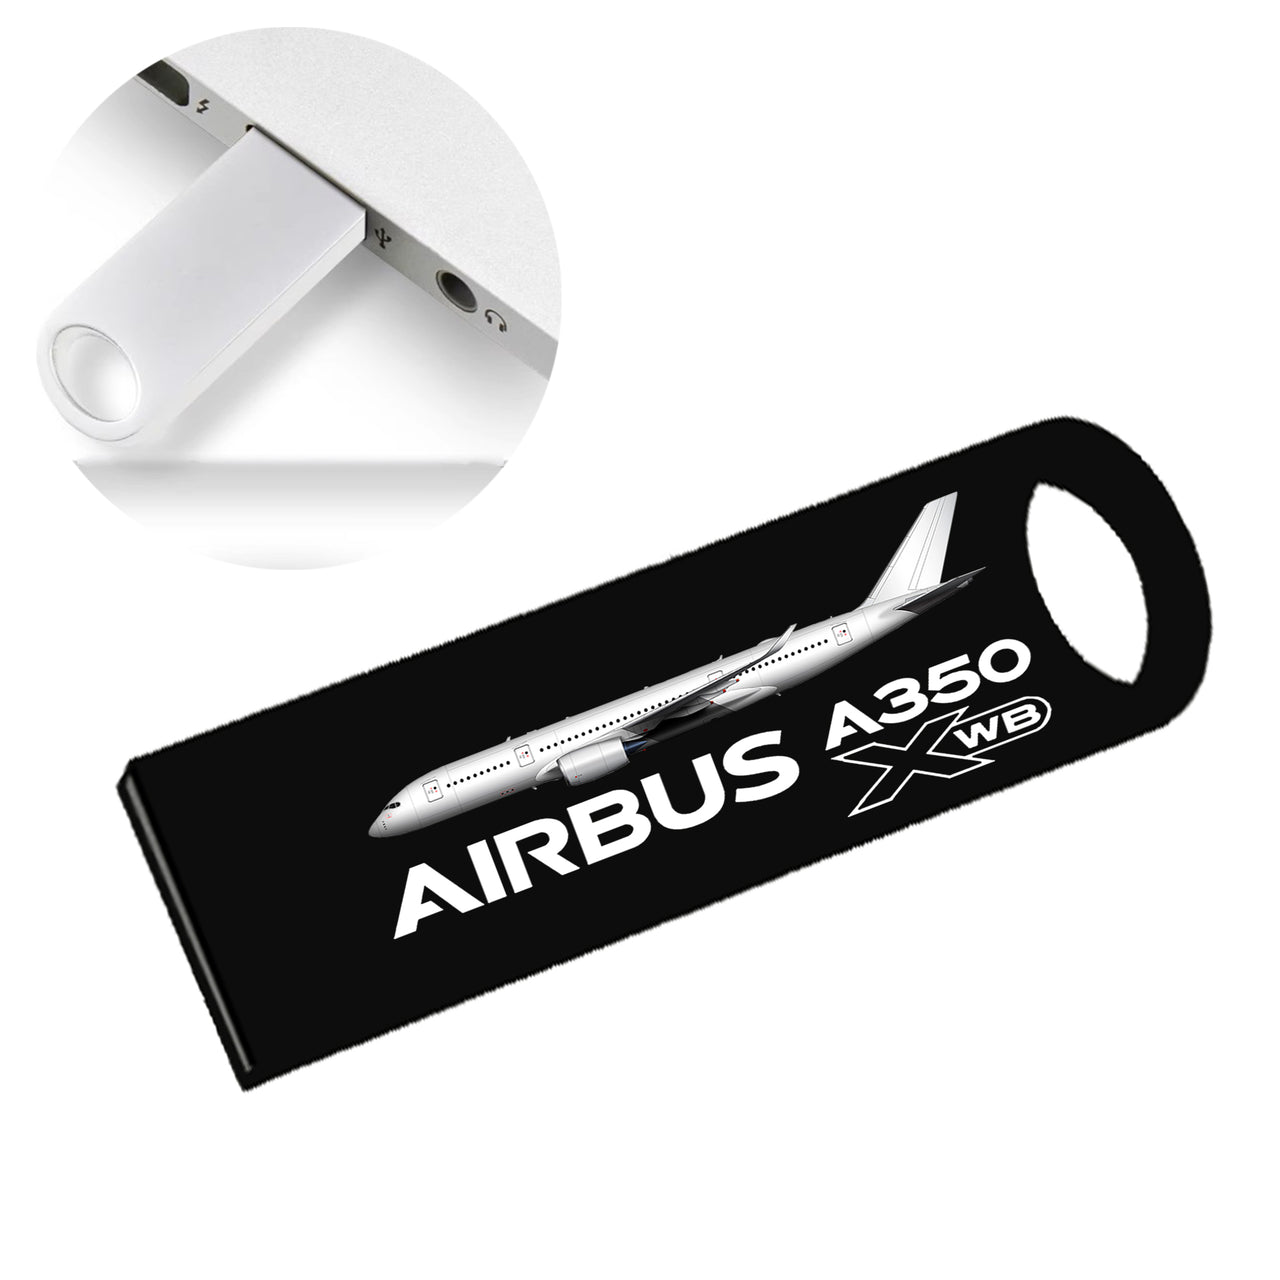 The Airbus A350 WXB Designed Waterproof USB Devices